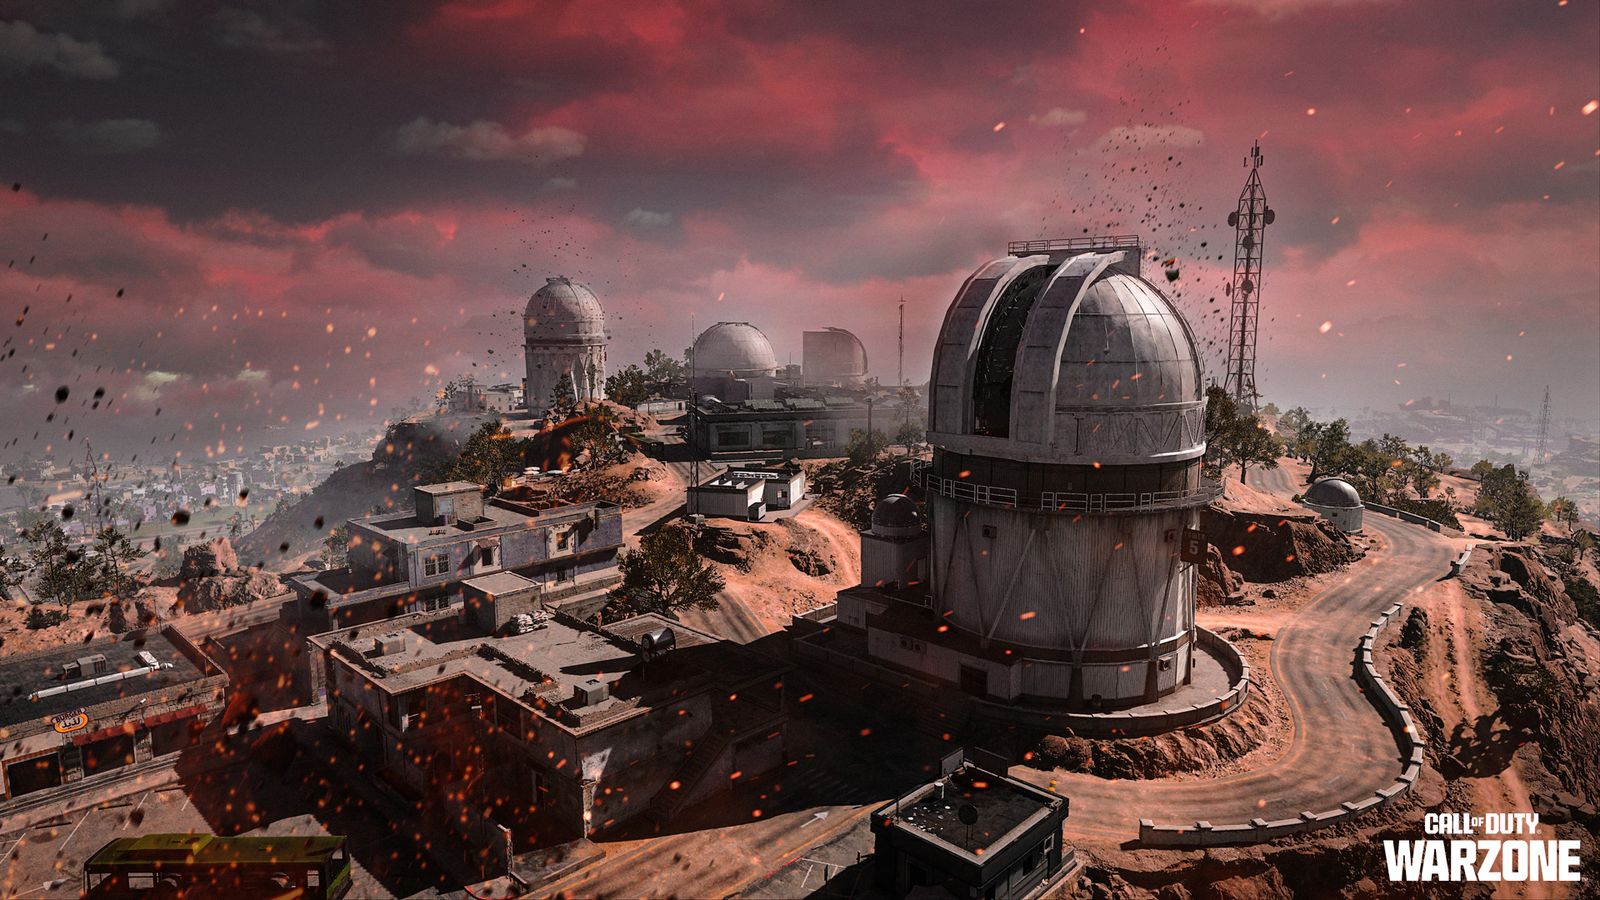 Modern Warfare 3 event in Warzone with red skies above Zaya Observatory